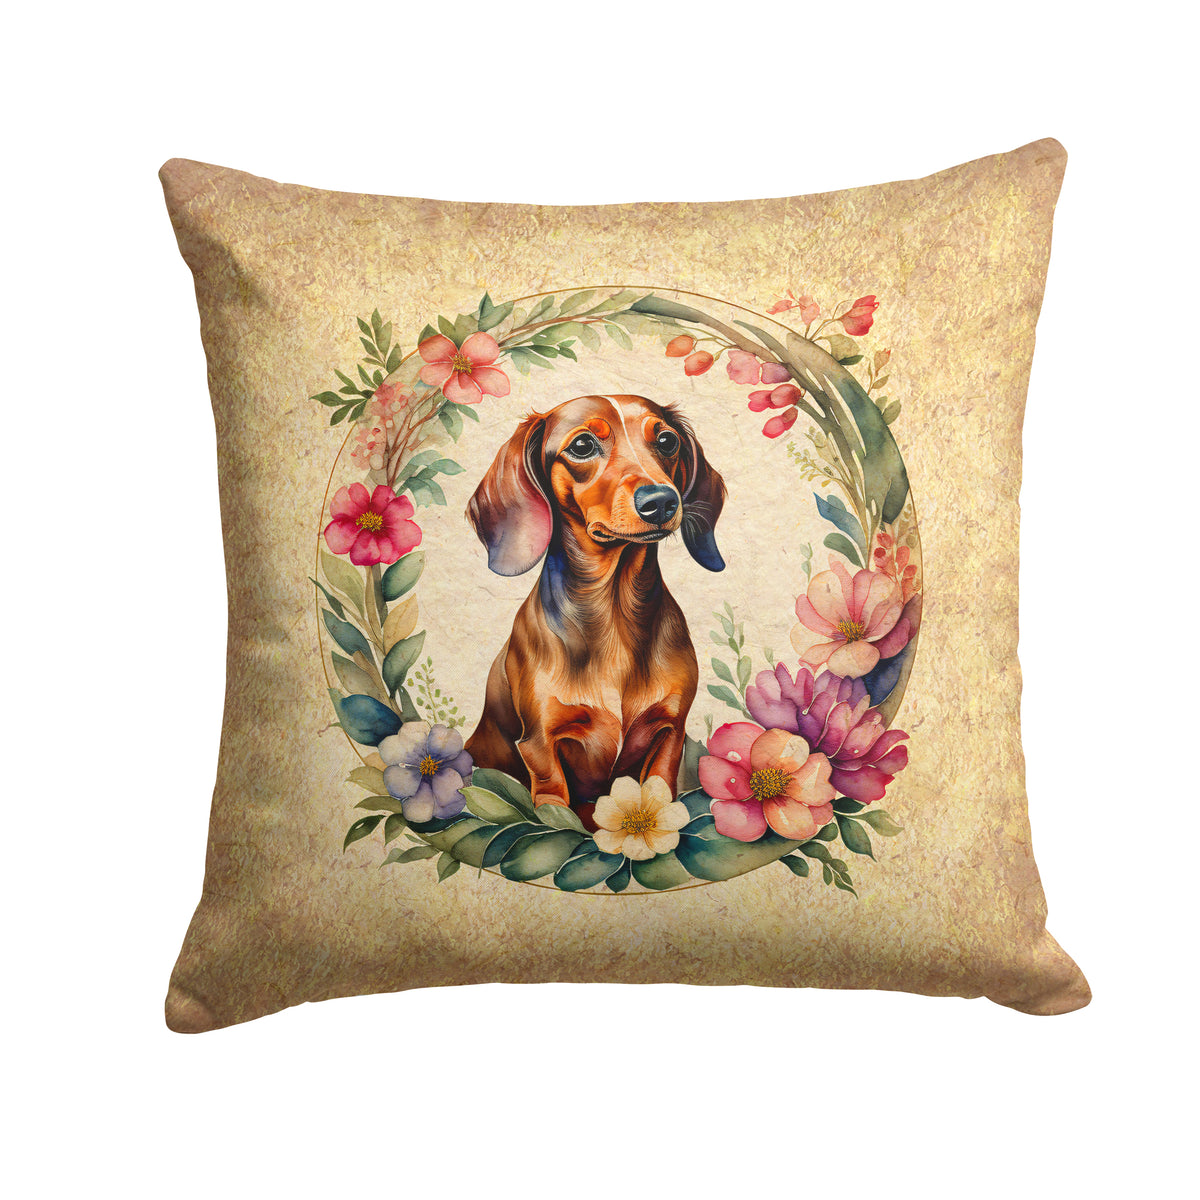 Buy this Dachshund and Flowers Fabric Decorative Pillow